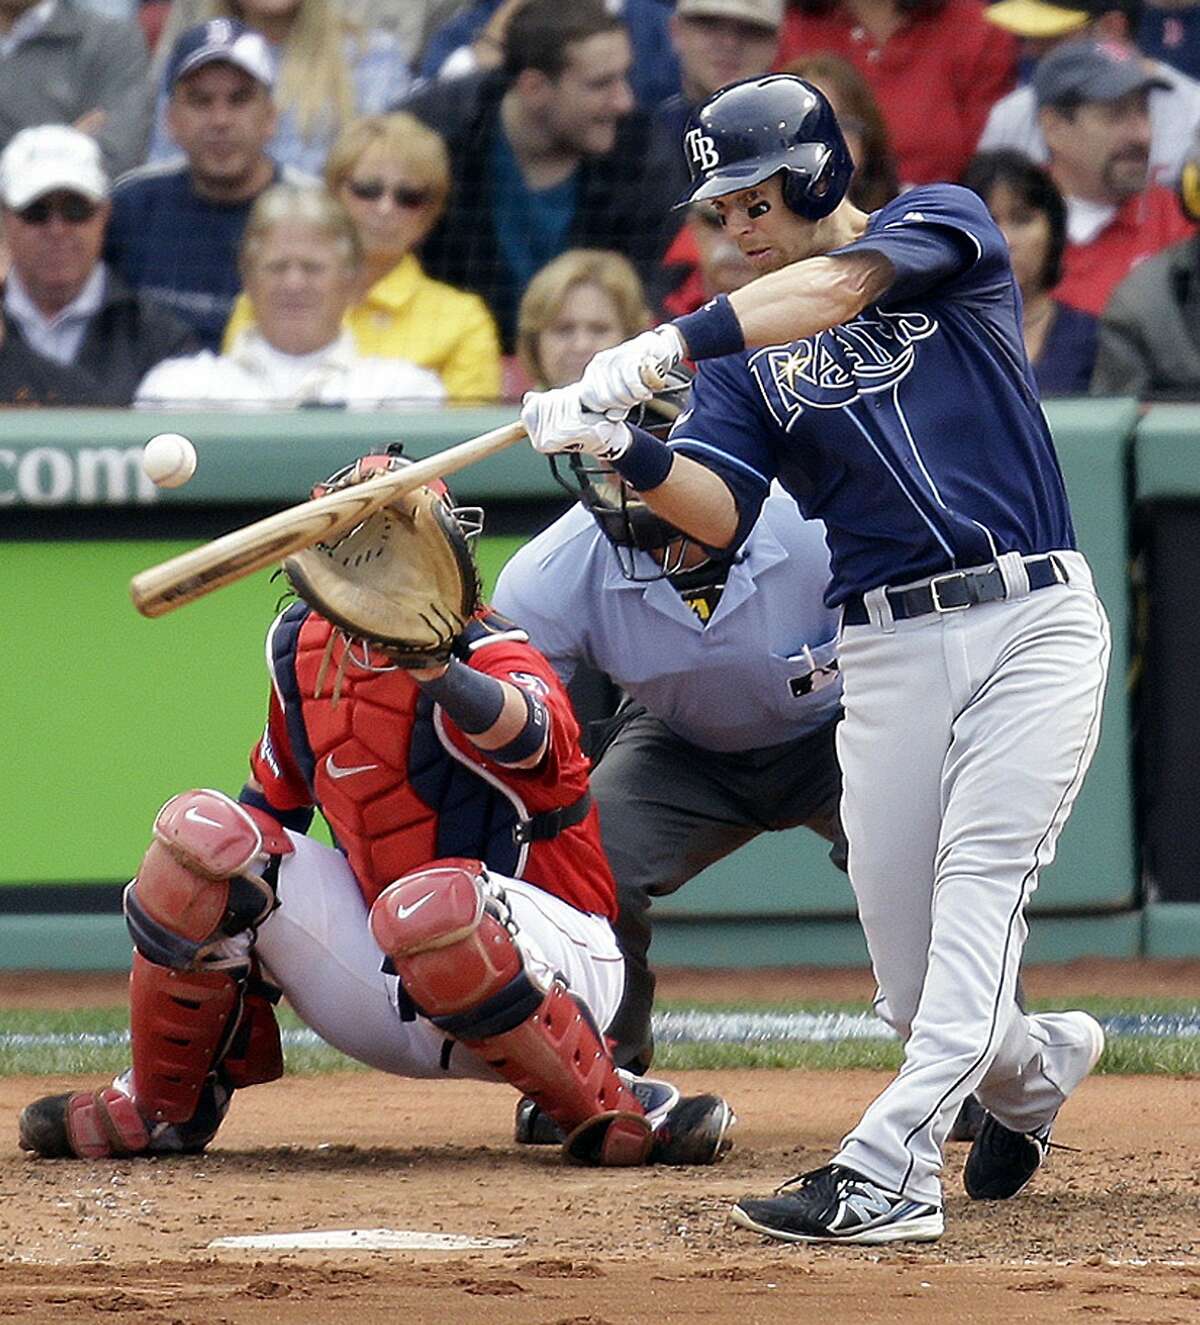 Tampa Bay Rays second baseman Ben Zobrist connects for a home run off Boston Red Sox starting pitcher Jon Lester, left, in front of Red Sox catcher Jarrod Saltalamacchia during the fourth inning of Game 1 of baseball's American League division series, Friday, Oct. 4, 2013, in Boston. (AP Photo/Stephan Savoia)